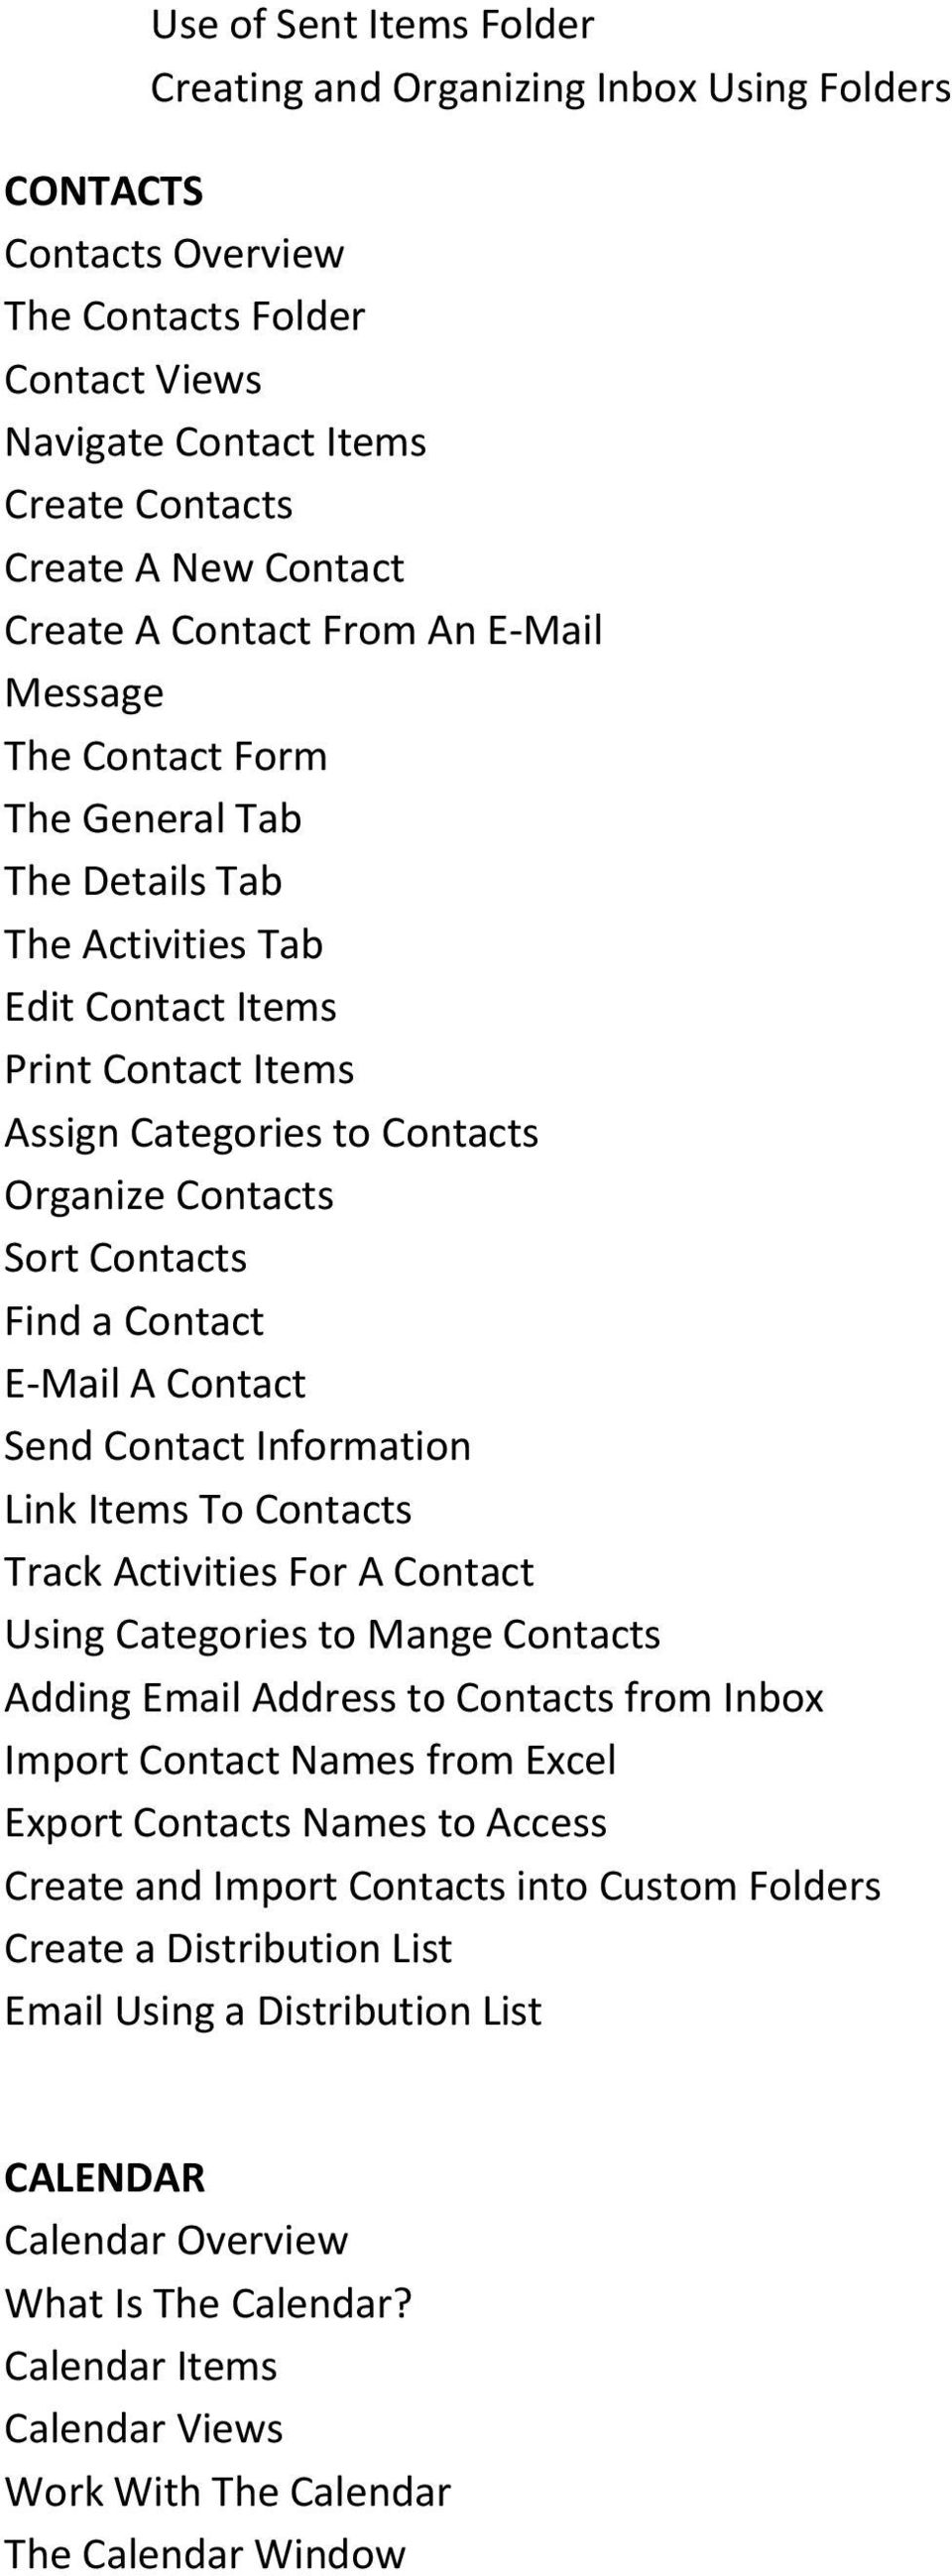 Find a Contact E-Mail A Contact Send Contact Information Link Items To Contacts Track Activities For A Contact Using Categories to Mange Contacts Adding Email Address to Contacts from Inbox Import